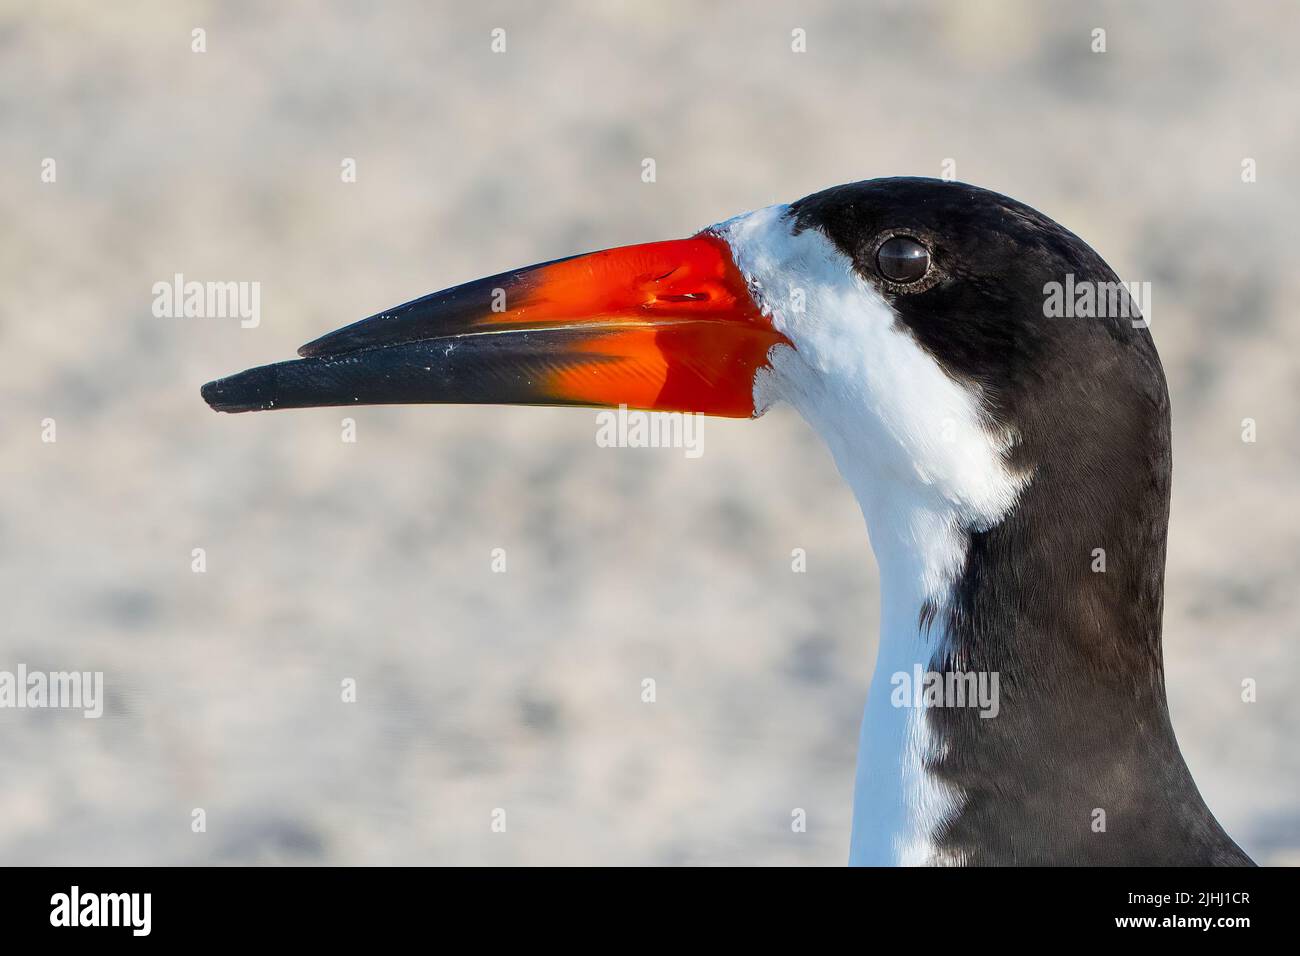 Close-up Portrait of a Black Skimmer Stock Photo